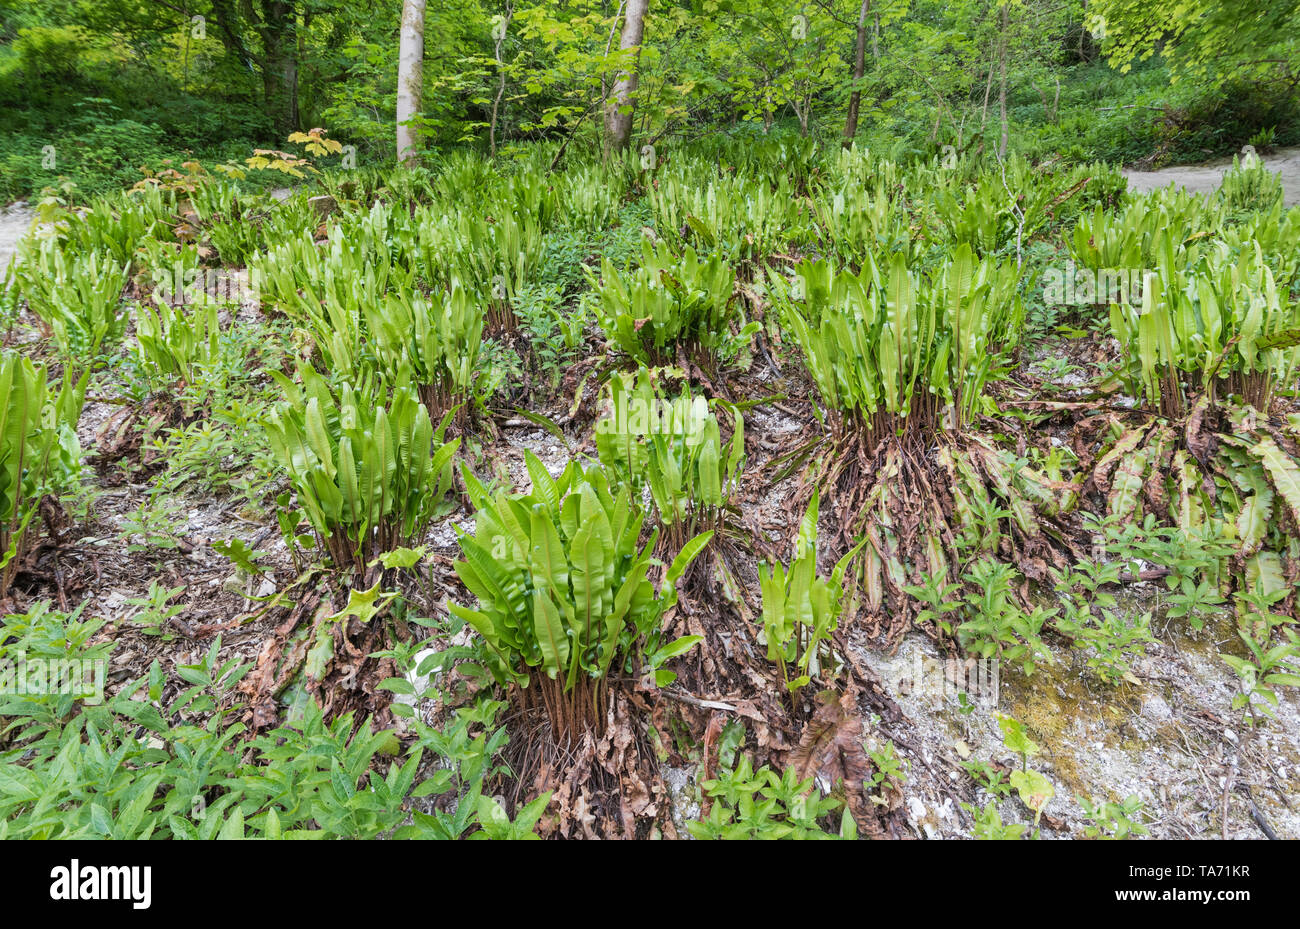 Asplenium scolopendrium (Hart's tongue fern or Burnt weed), an evergreen fern planted and growing in clumps in Spring in West Sussex, UK. Stock Photo